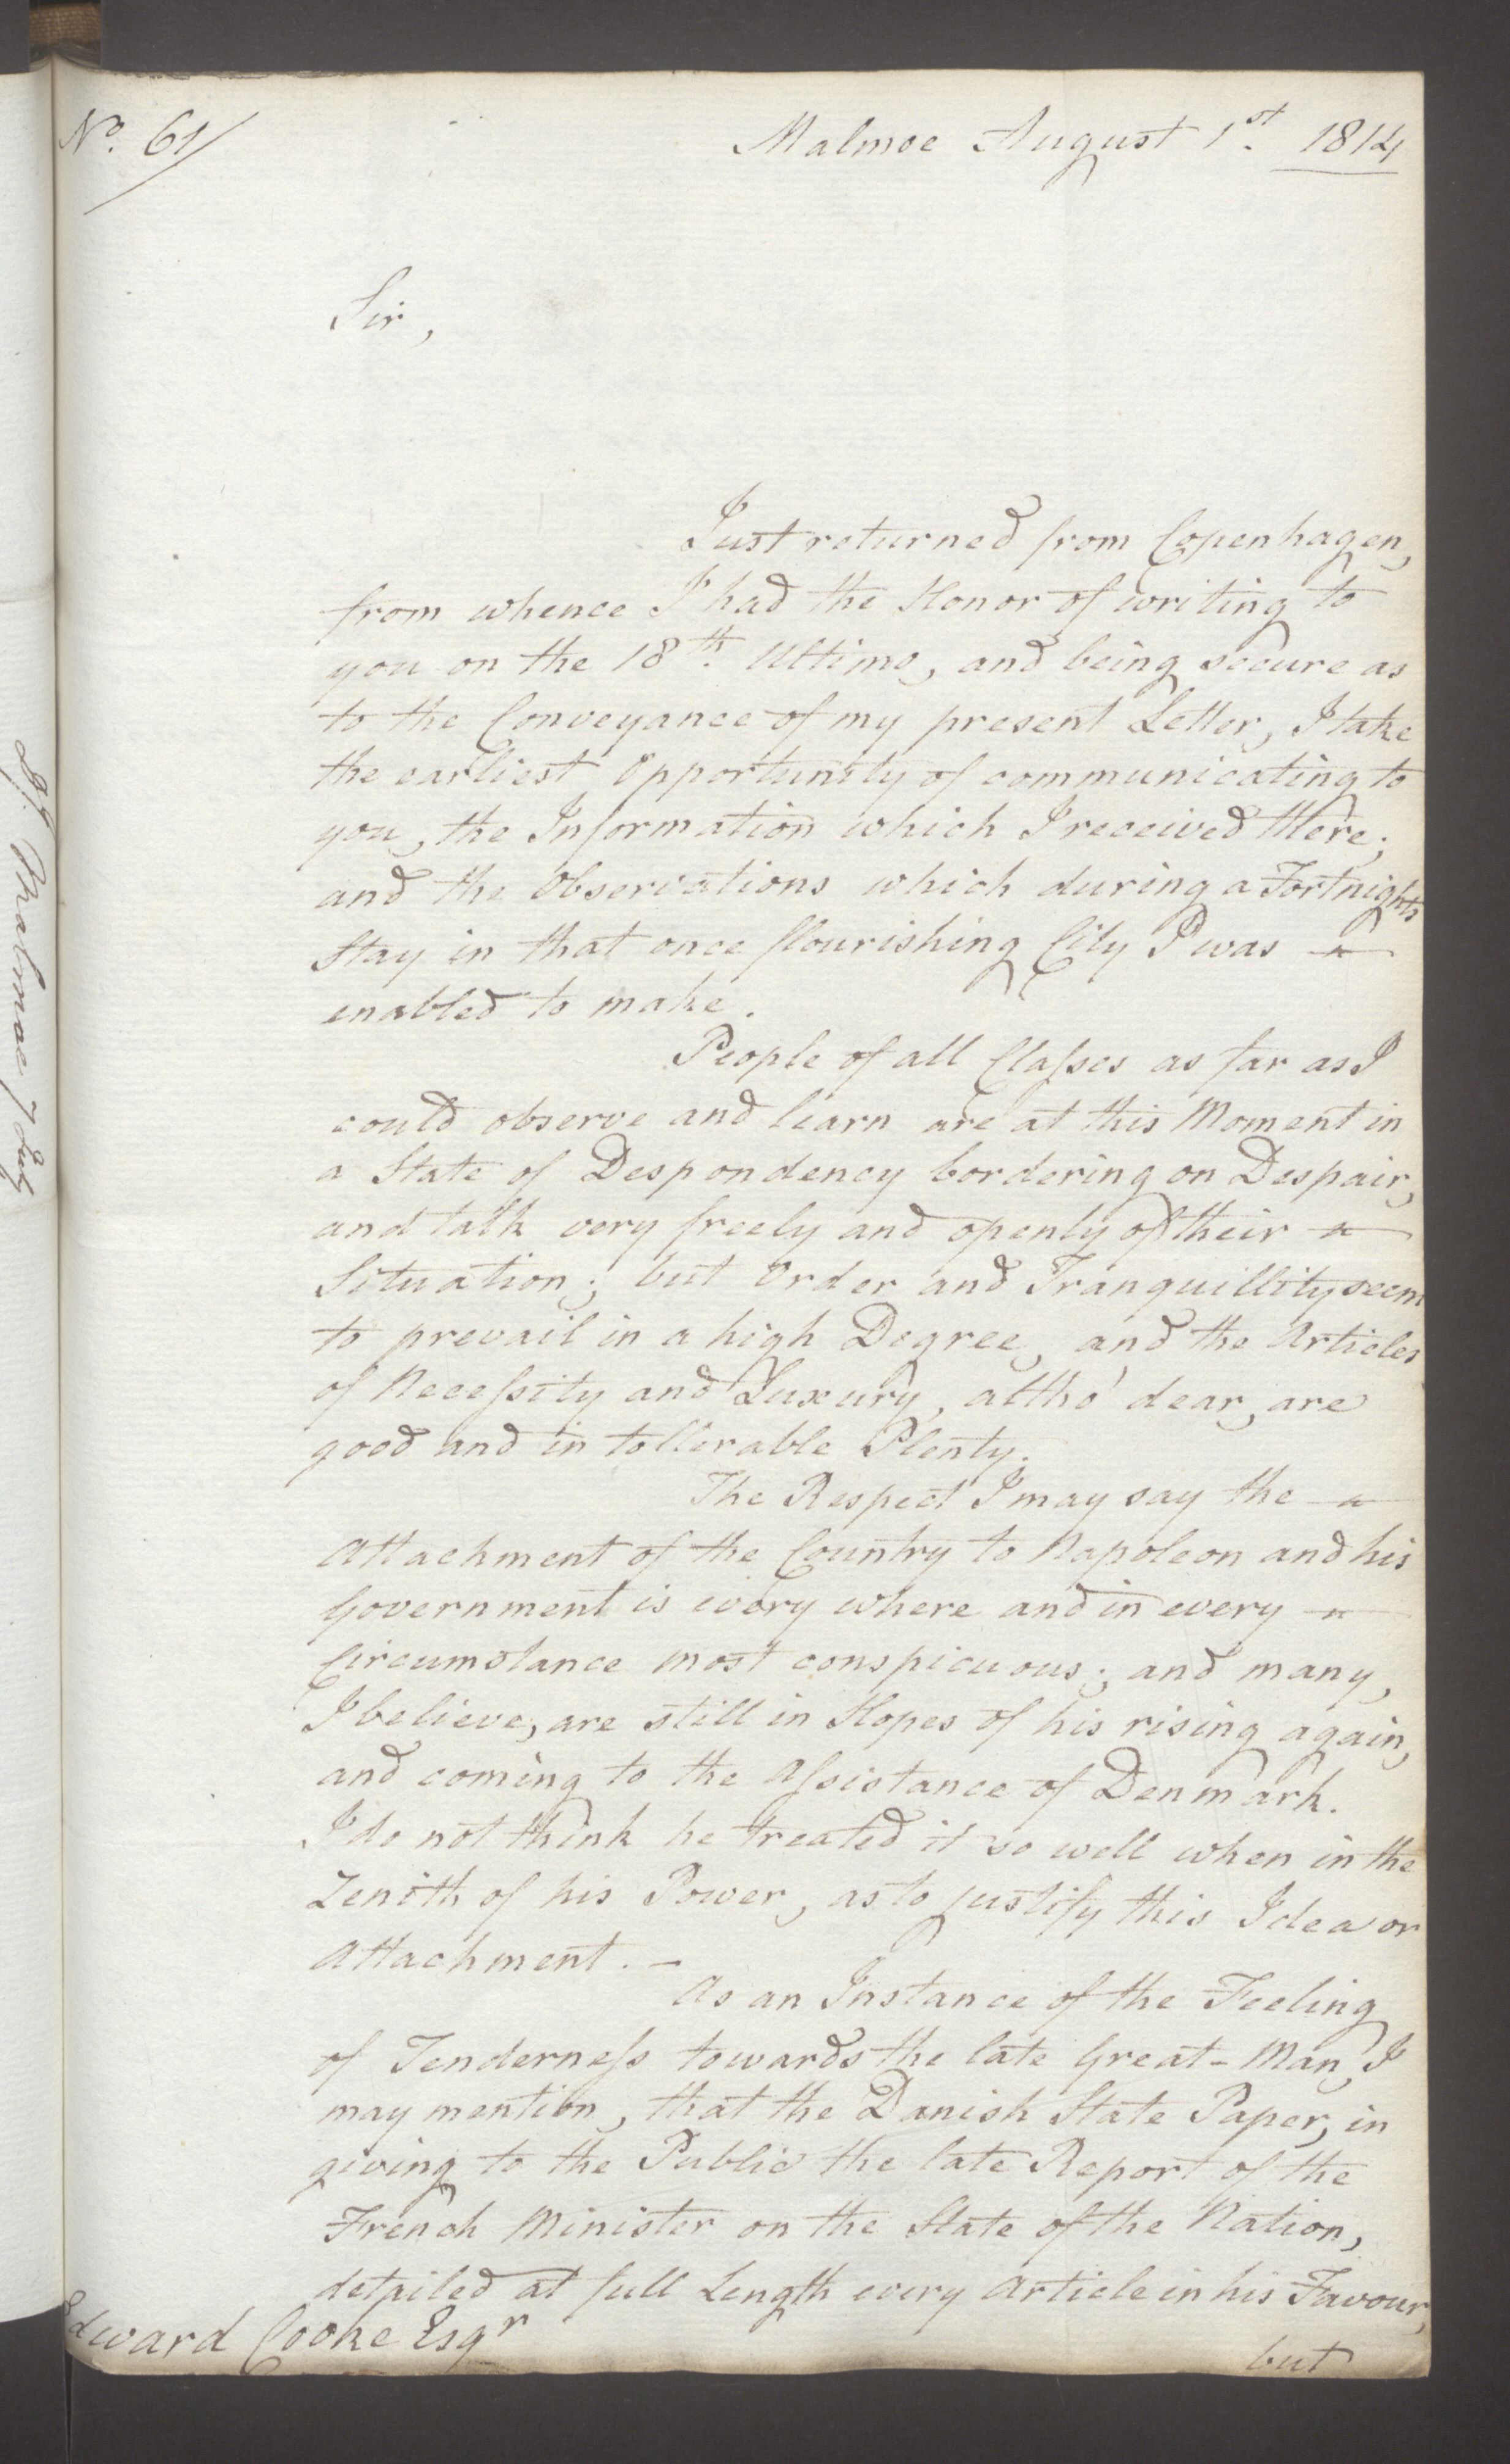 Foreign Office*, UKA/-/FO 38/16: Sir C. Gordon. Reports from Malmö, Jonkoping, and Helsingborg, 1814, p. 75